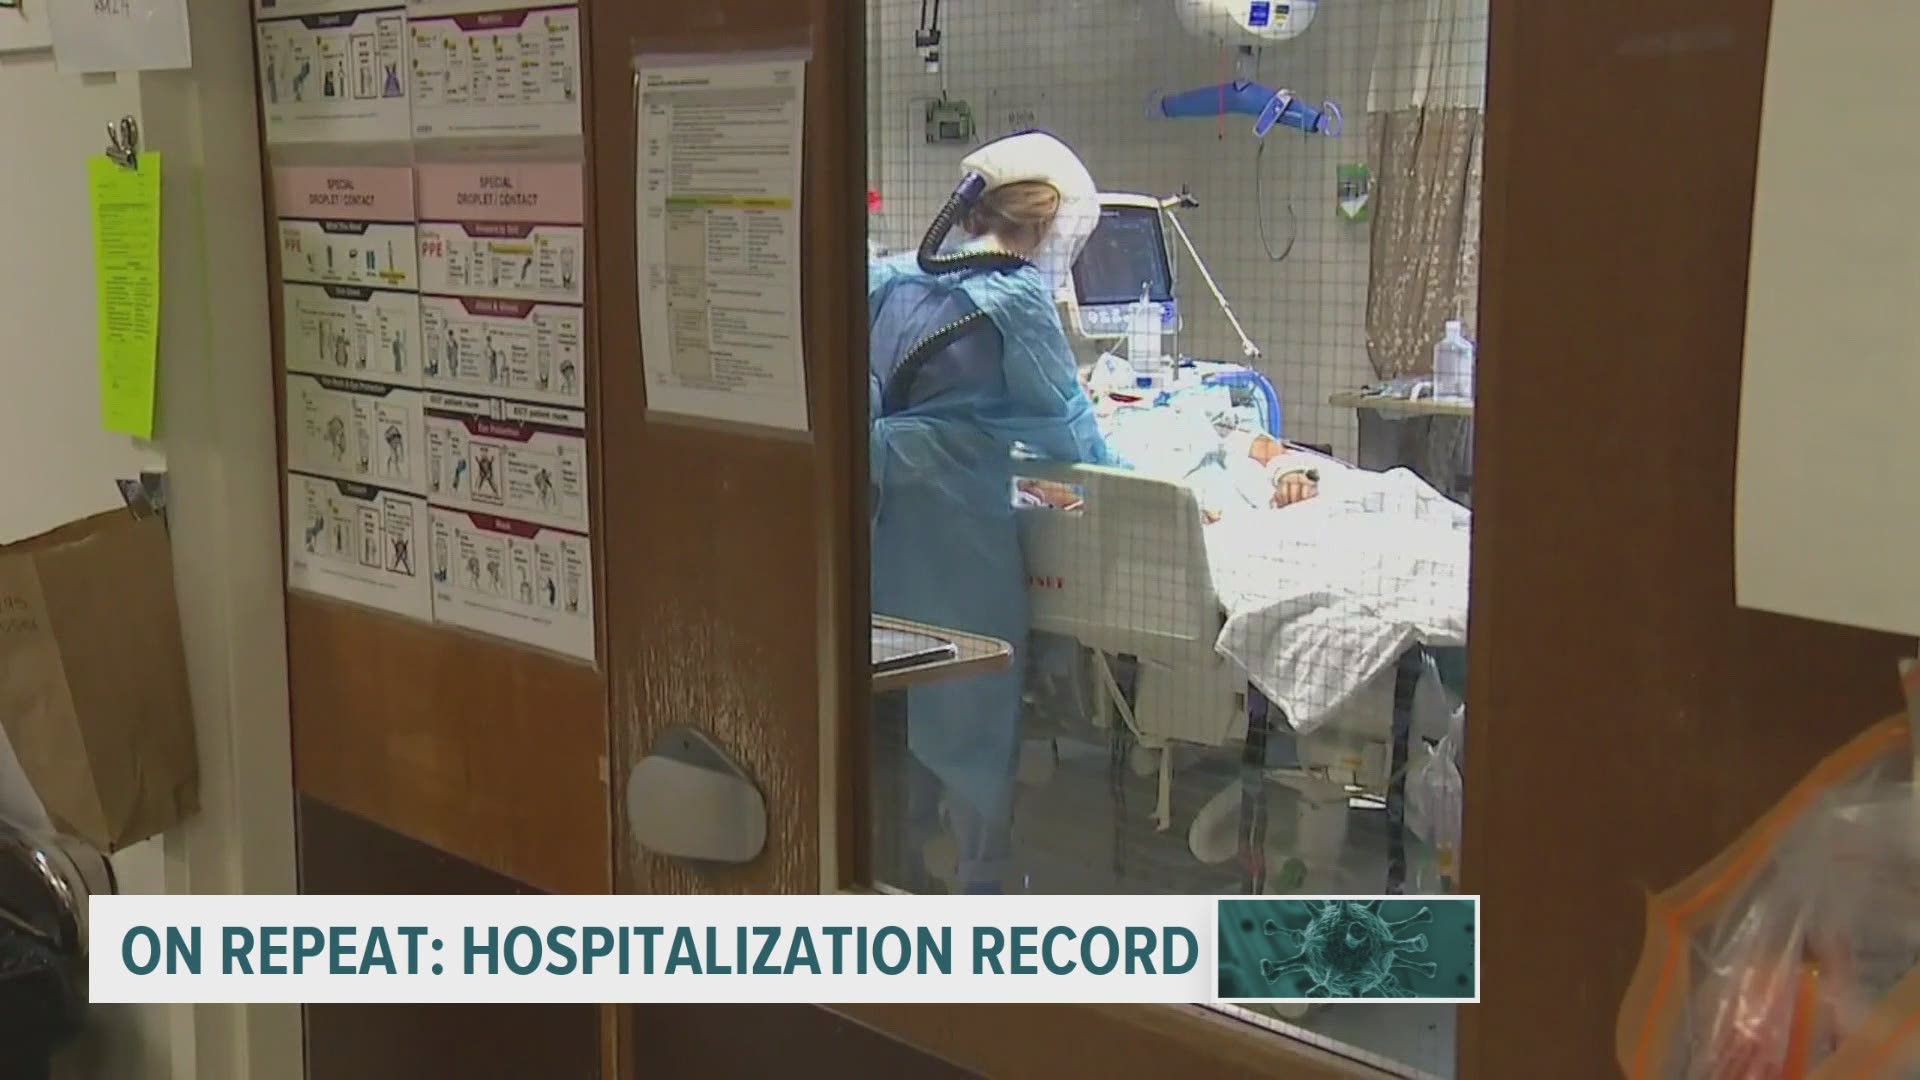 Iowa has broken its own hospitalization record 13 times in October alone. Doctors warn that bed capacity may be limited as flu season looms.